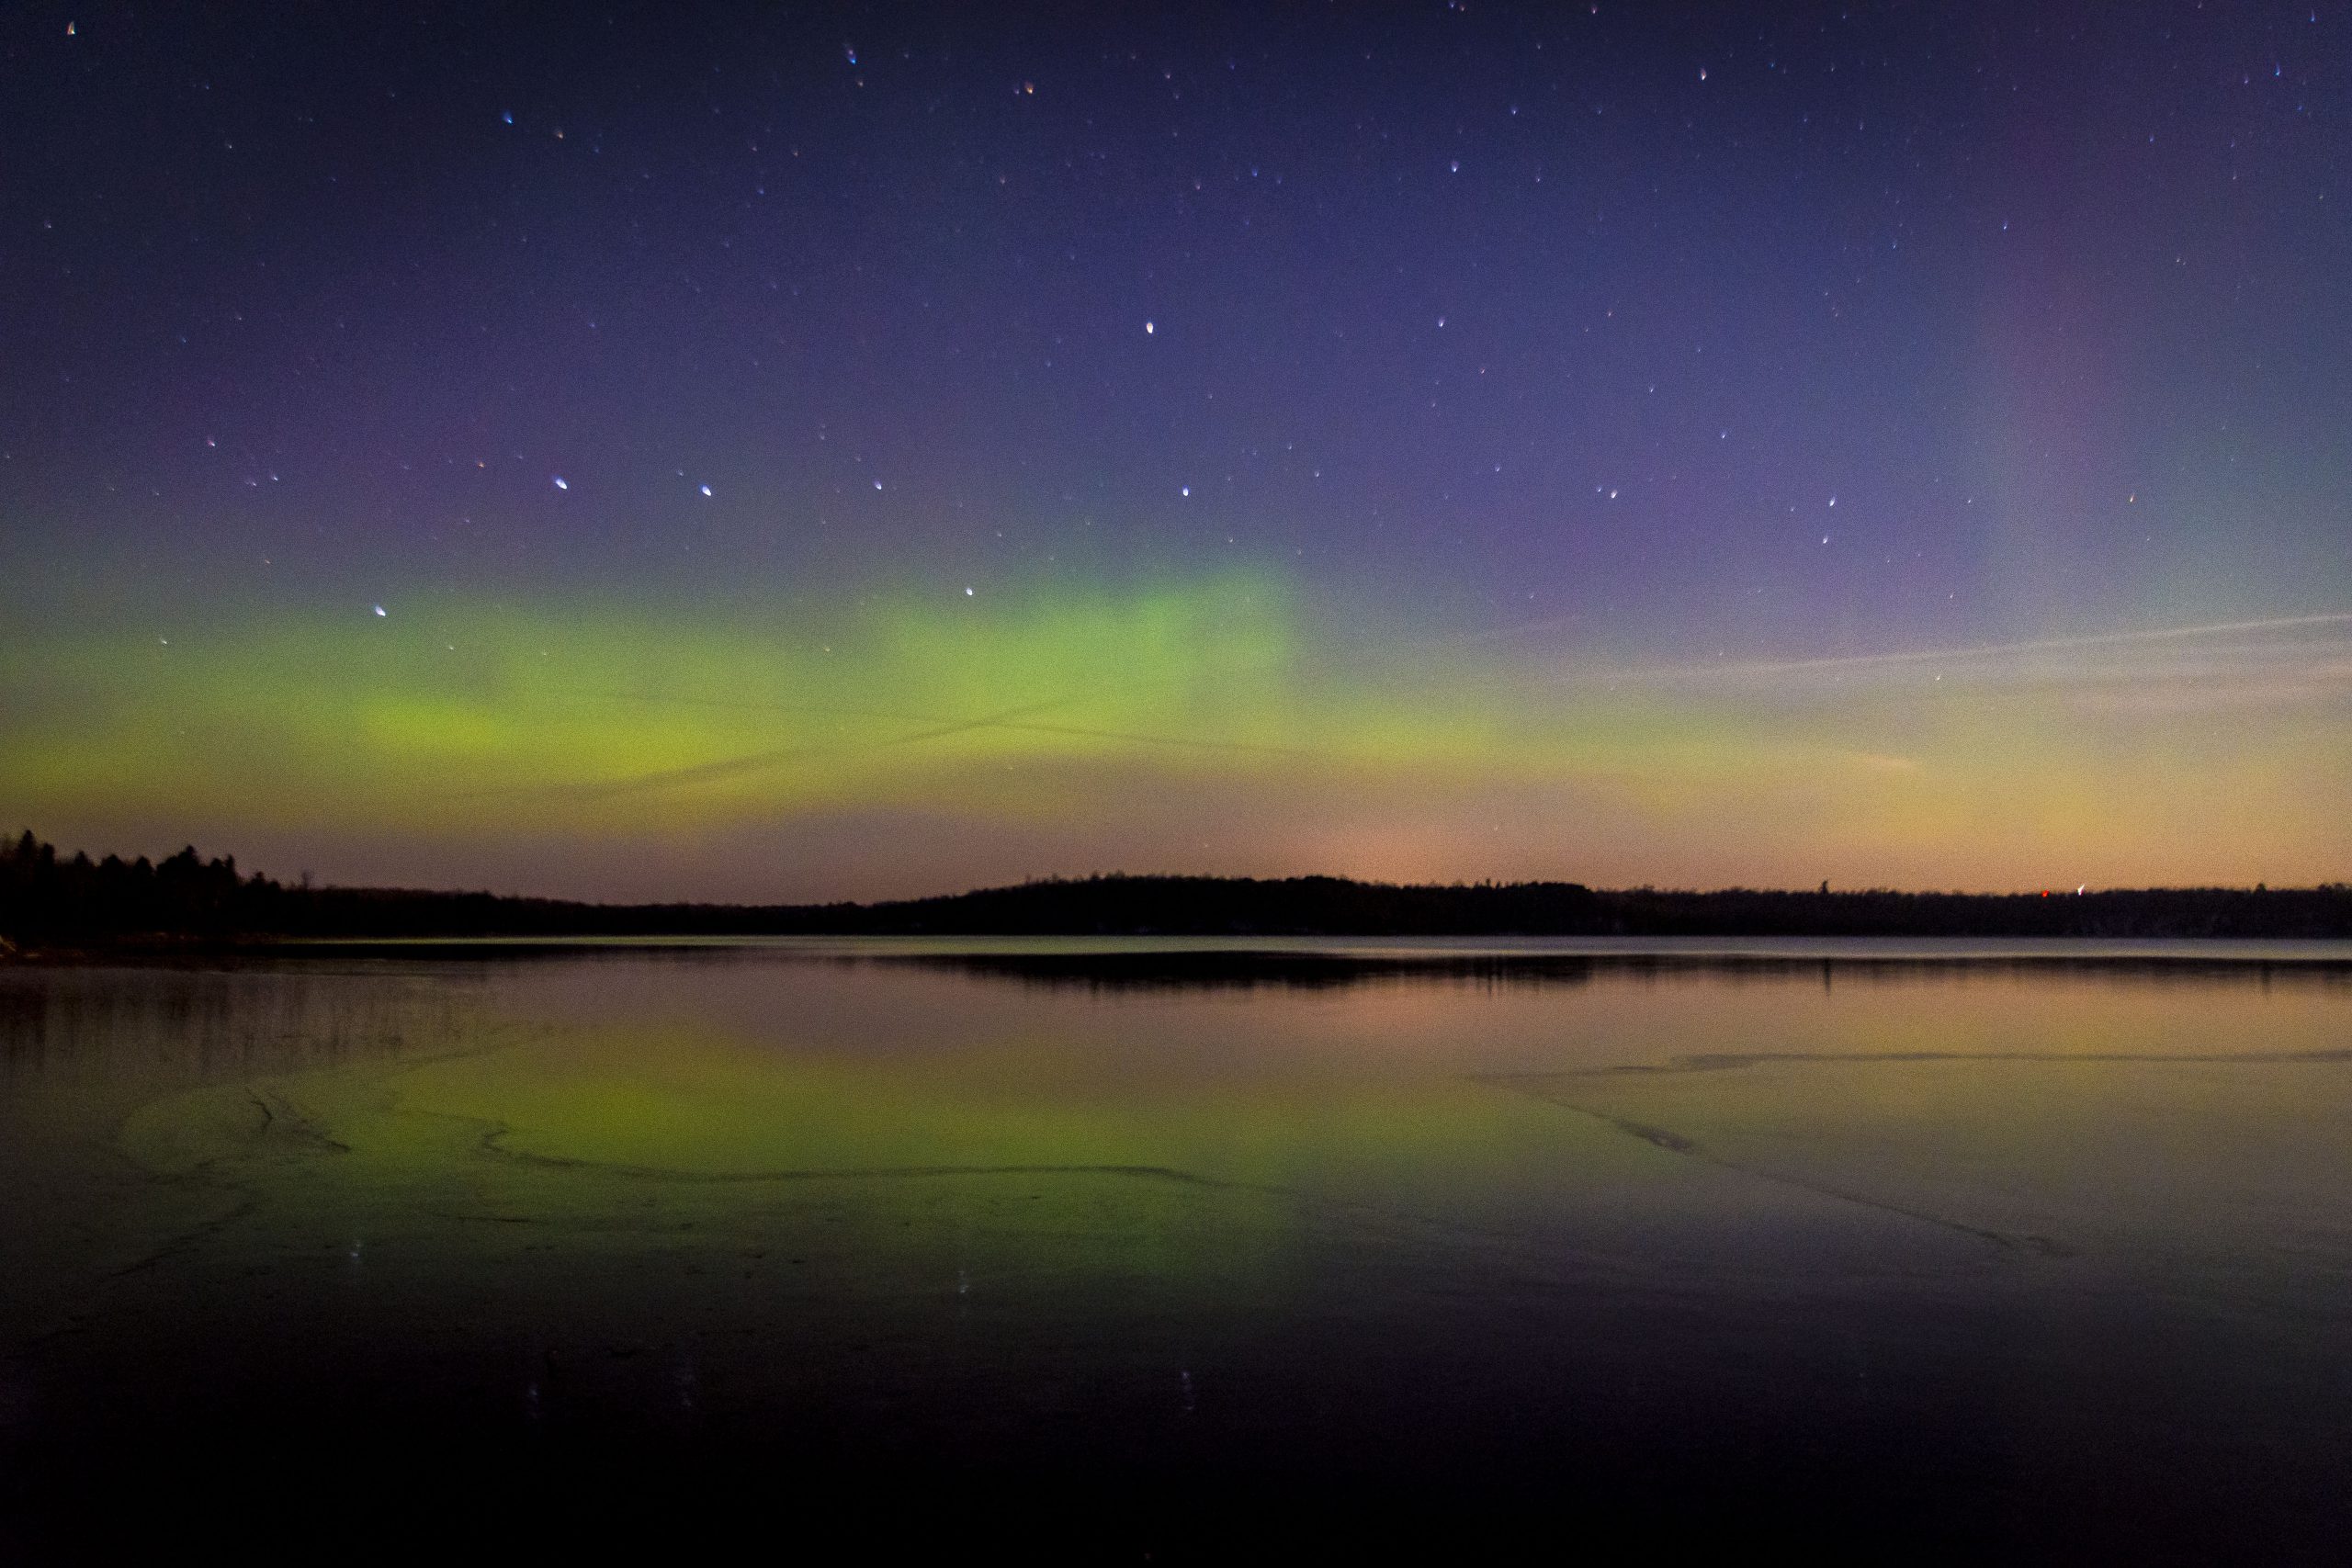 Northern lights over North Twin lake on the Chippewa National Forest